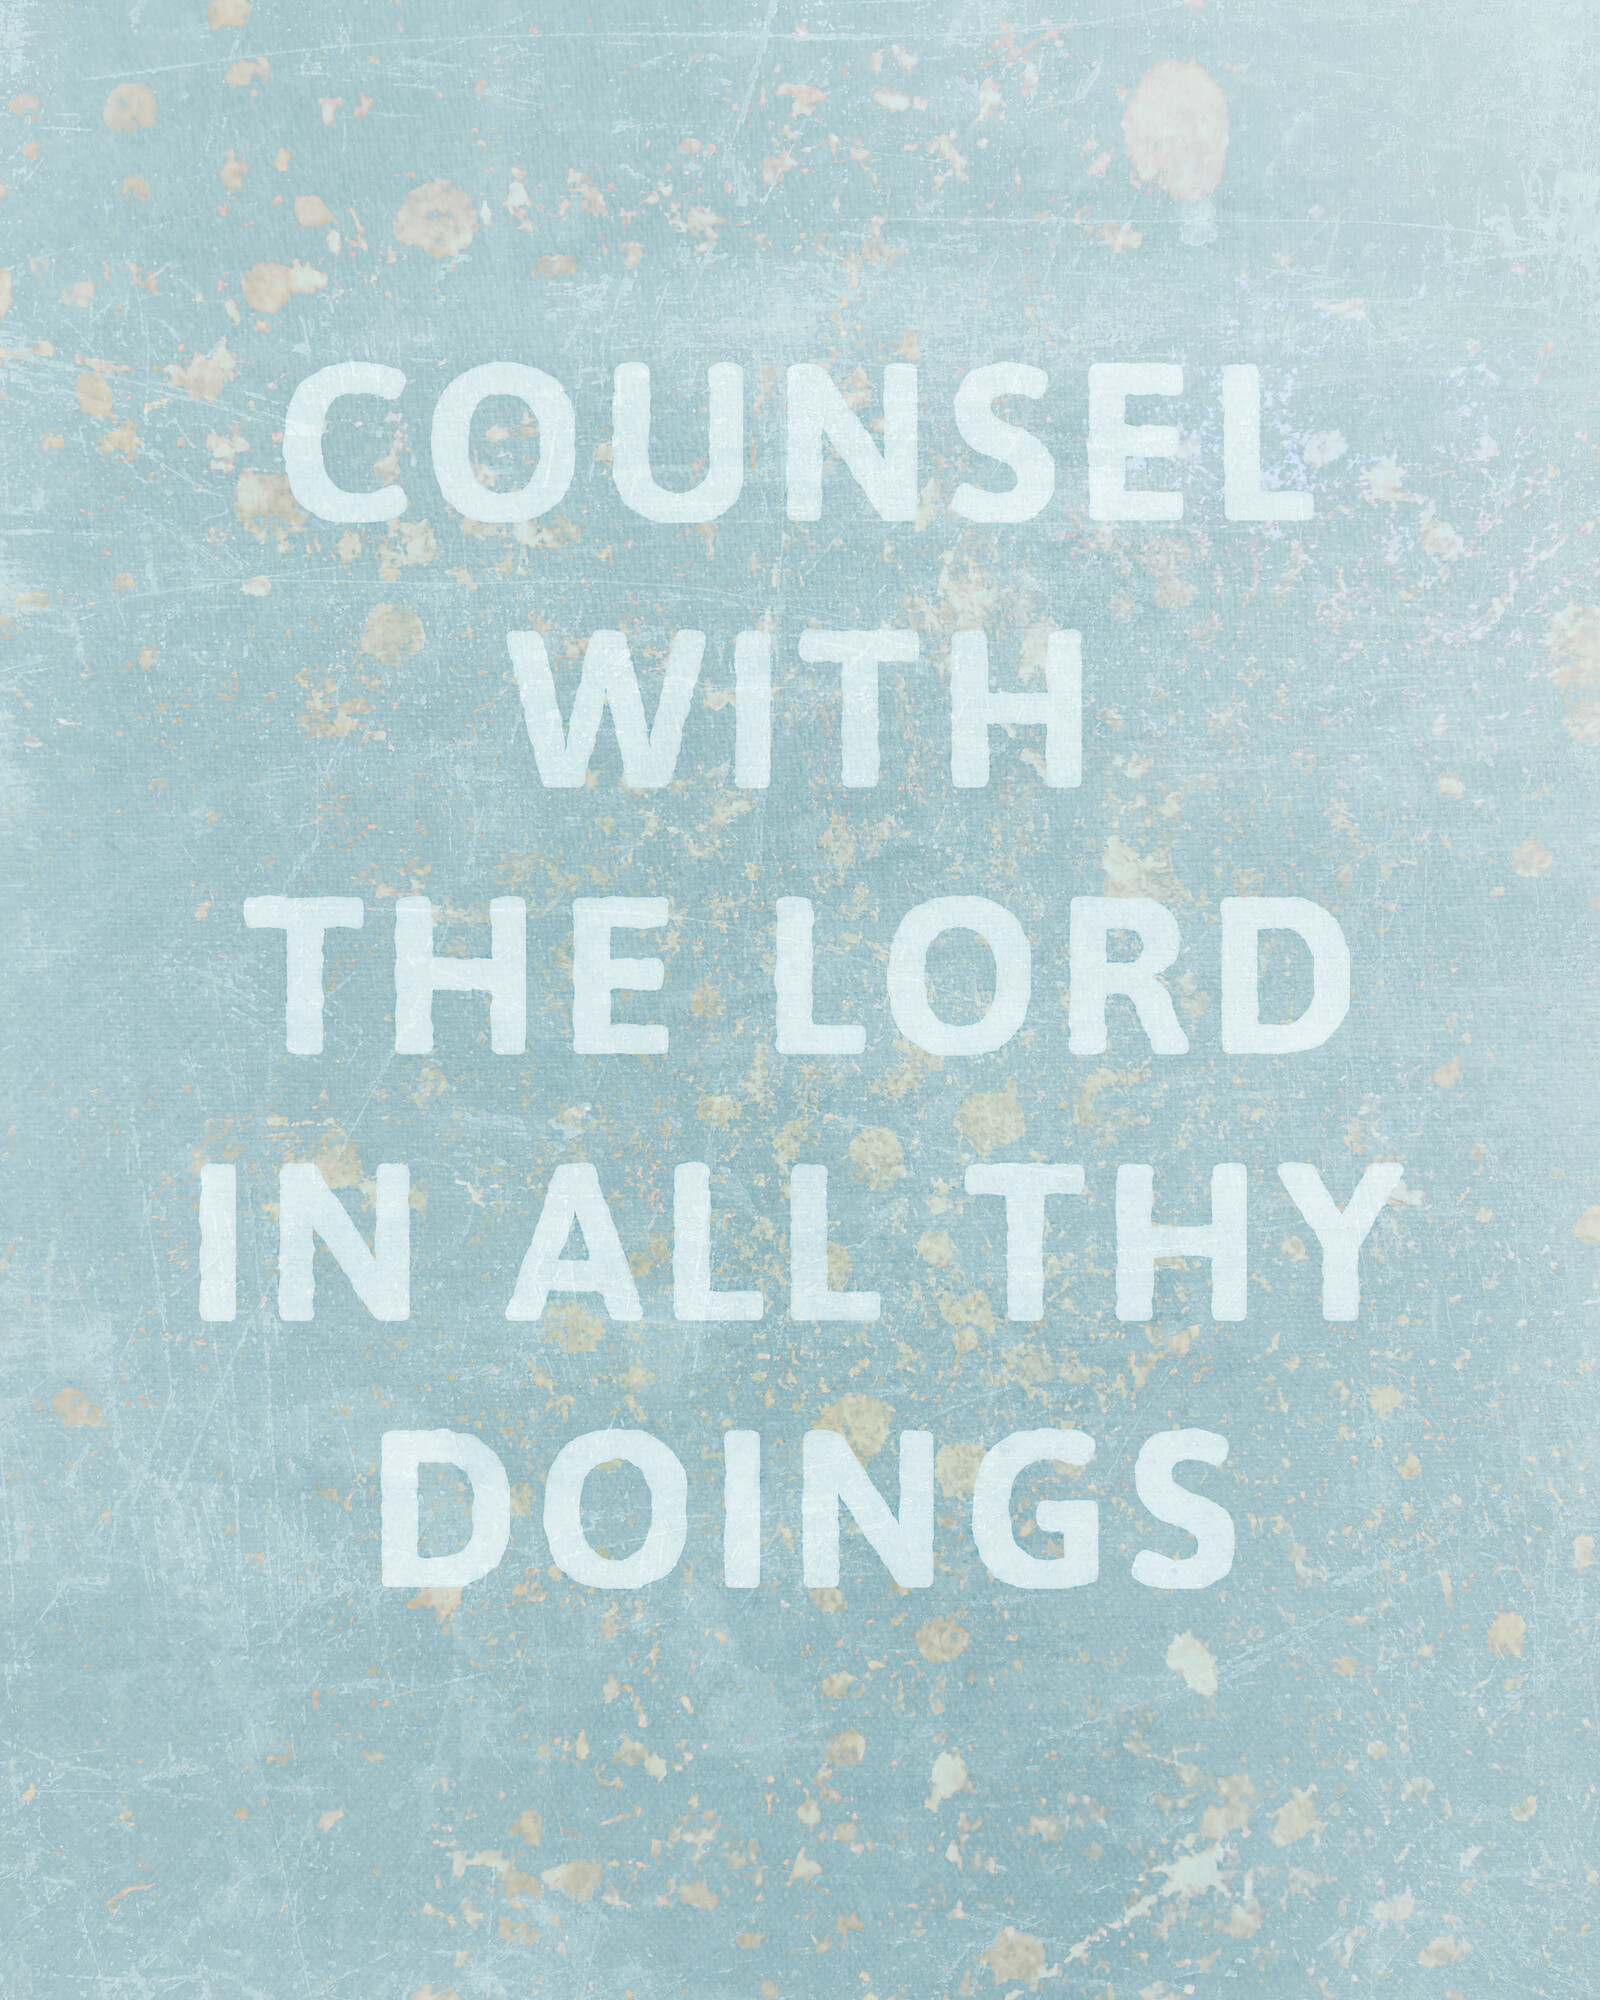 Counsel with the Lord in all thy doings